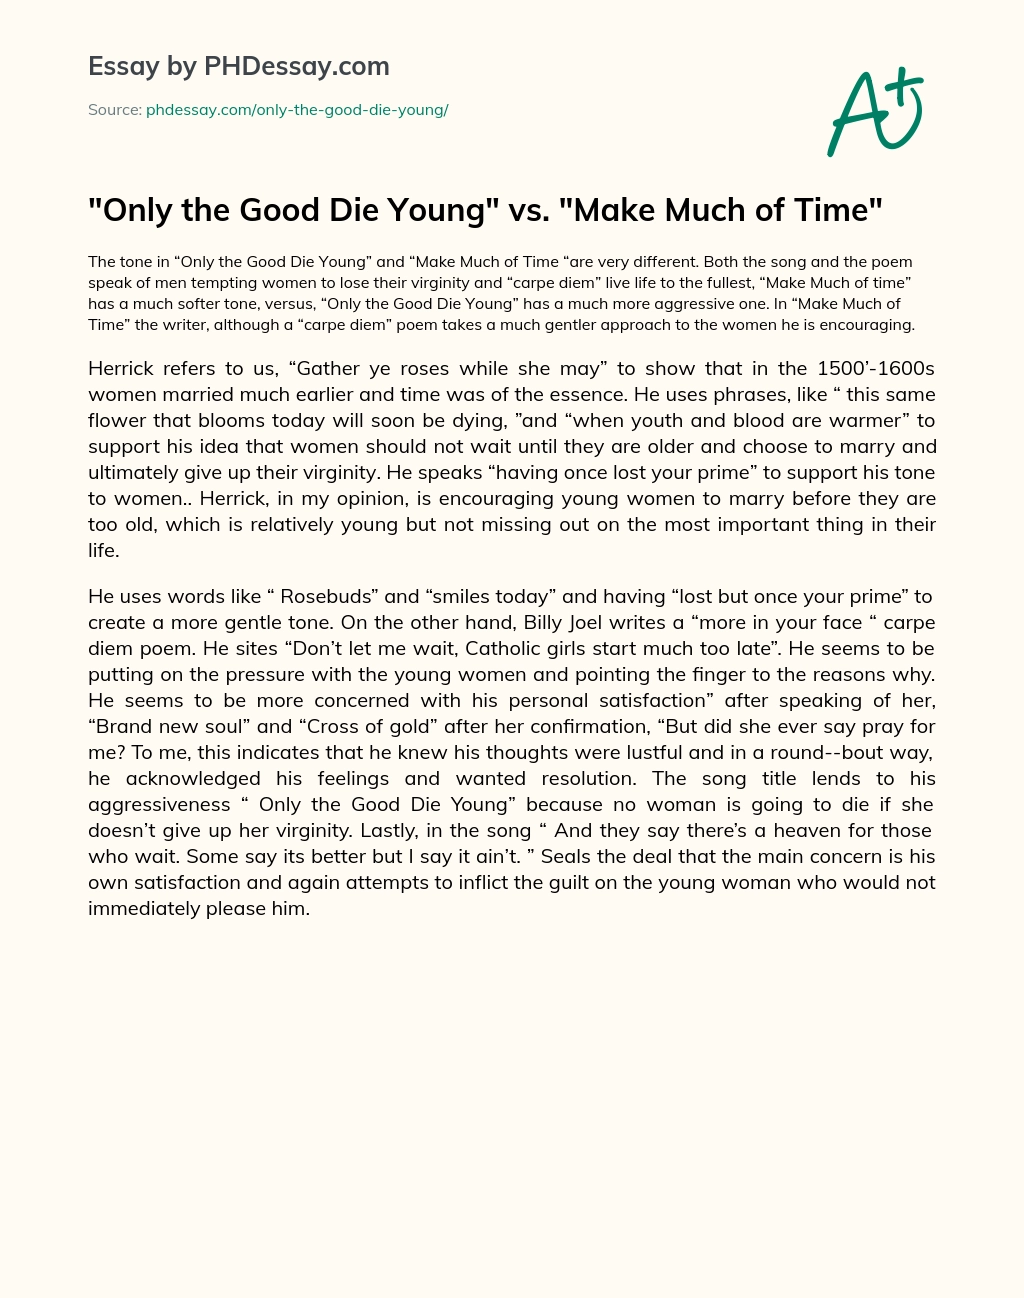 Only the Good Die Young vs. Make Much of Time essay